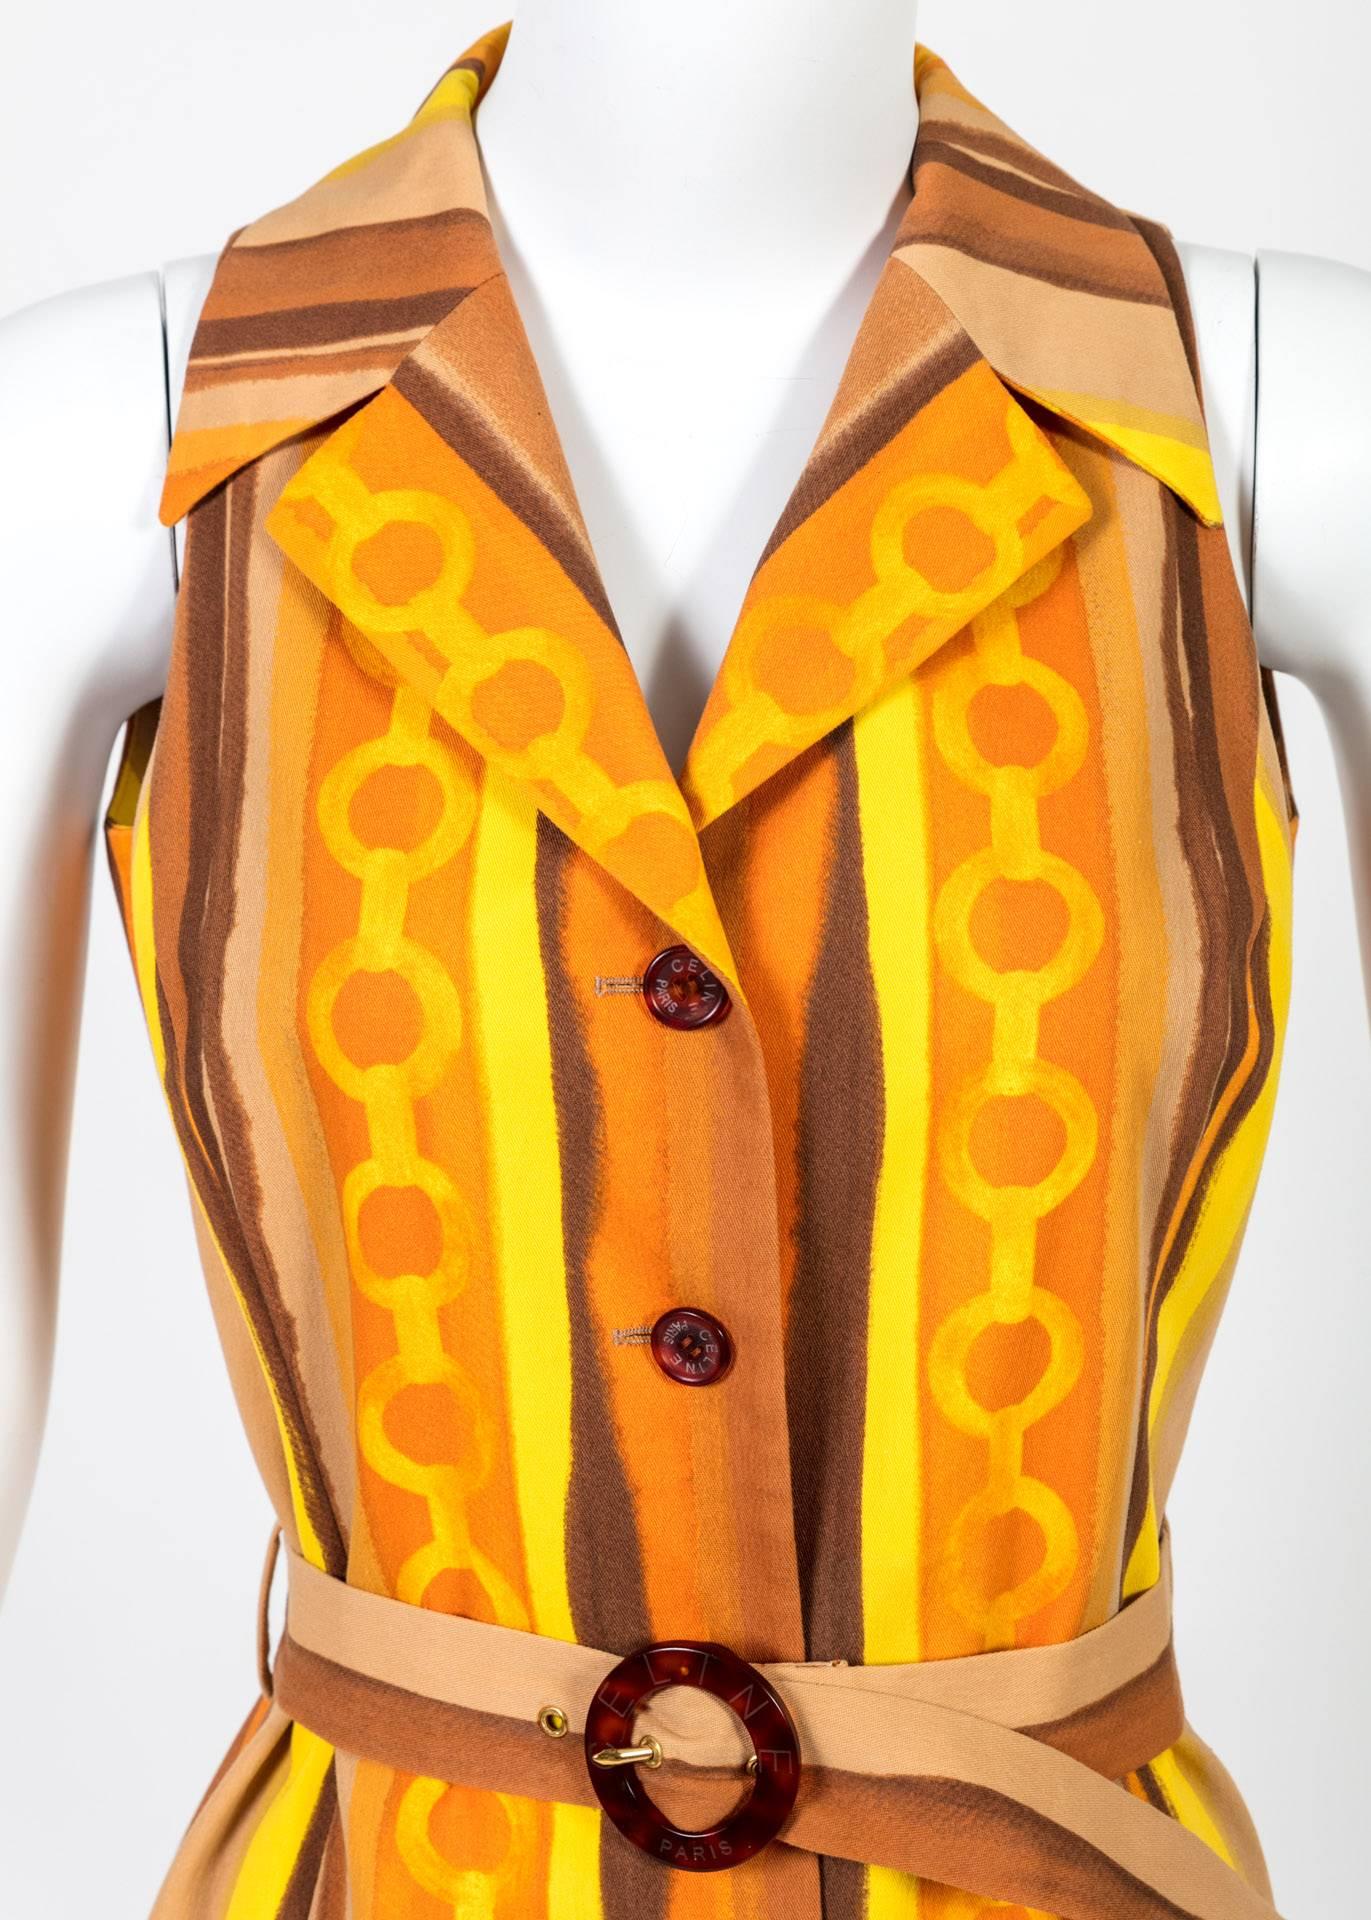 A signature equestrian motif gets the mod treatment in this amazing Céline vest. The horse bit, first designed by the French luxury brand in the early Seventies and still prominently used in its coveted accessories, is linked to form a chain, which